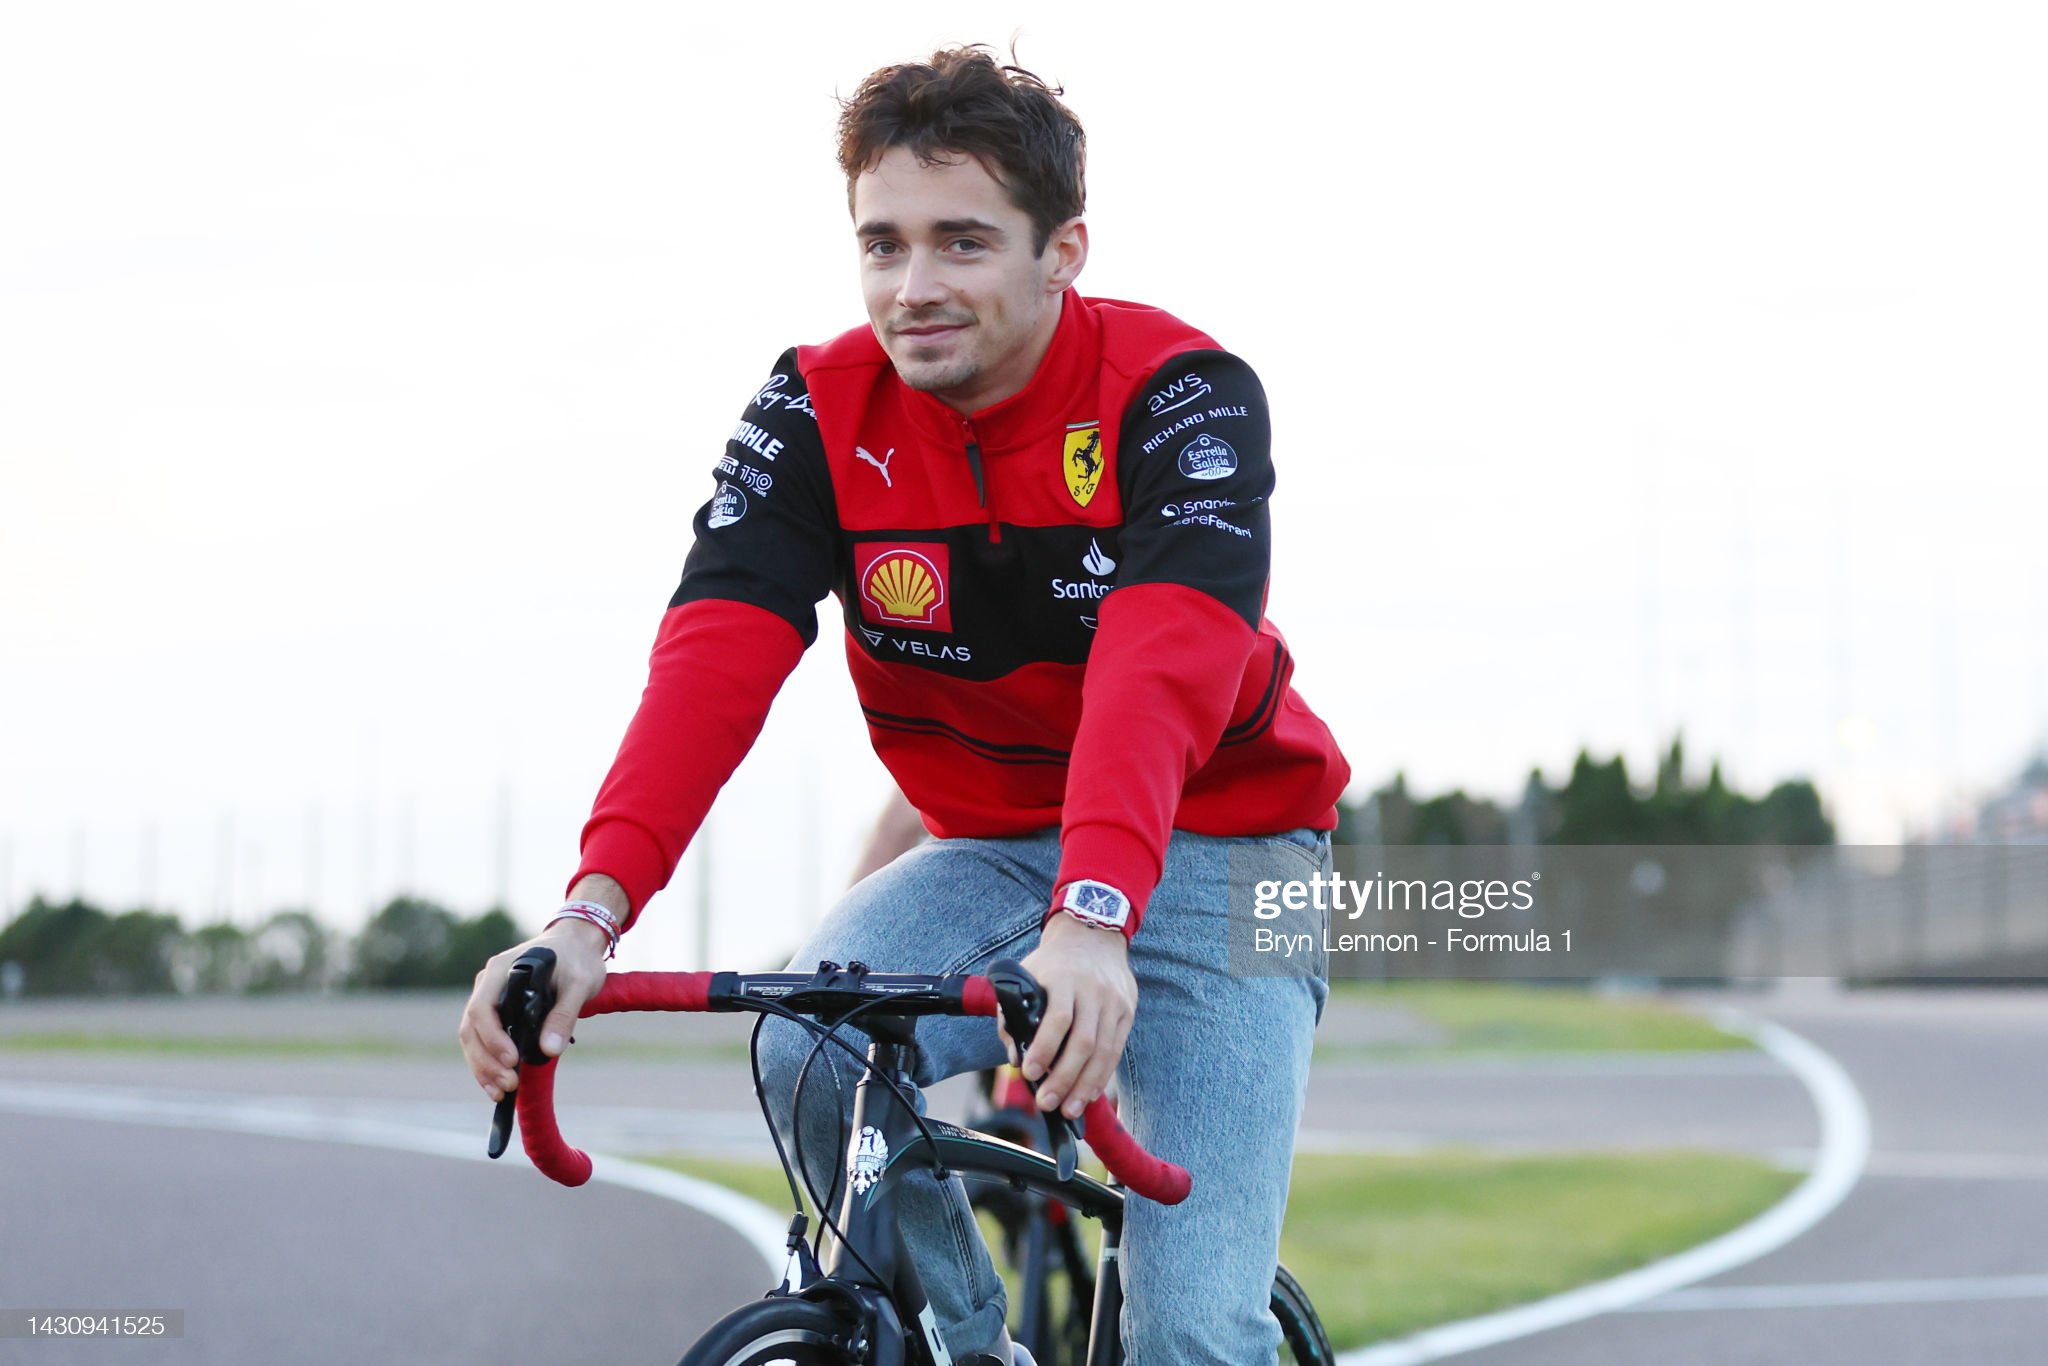 Charles Leclerc on a bicycle.